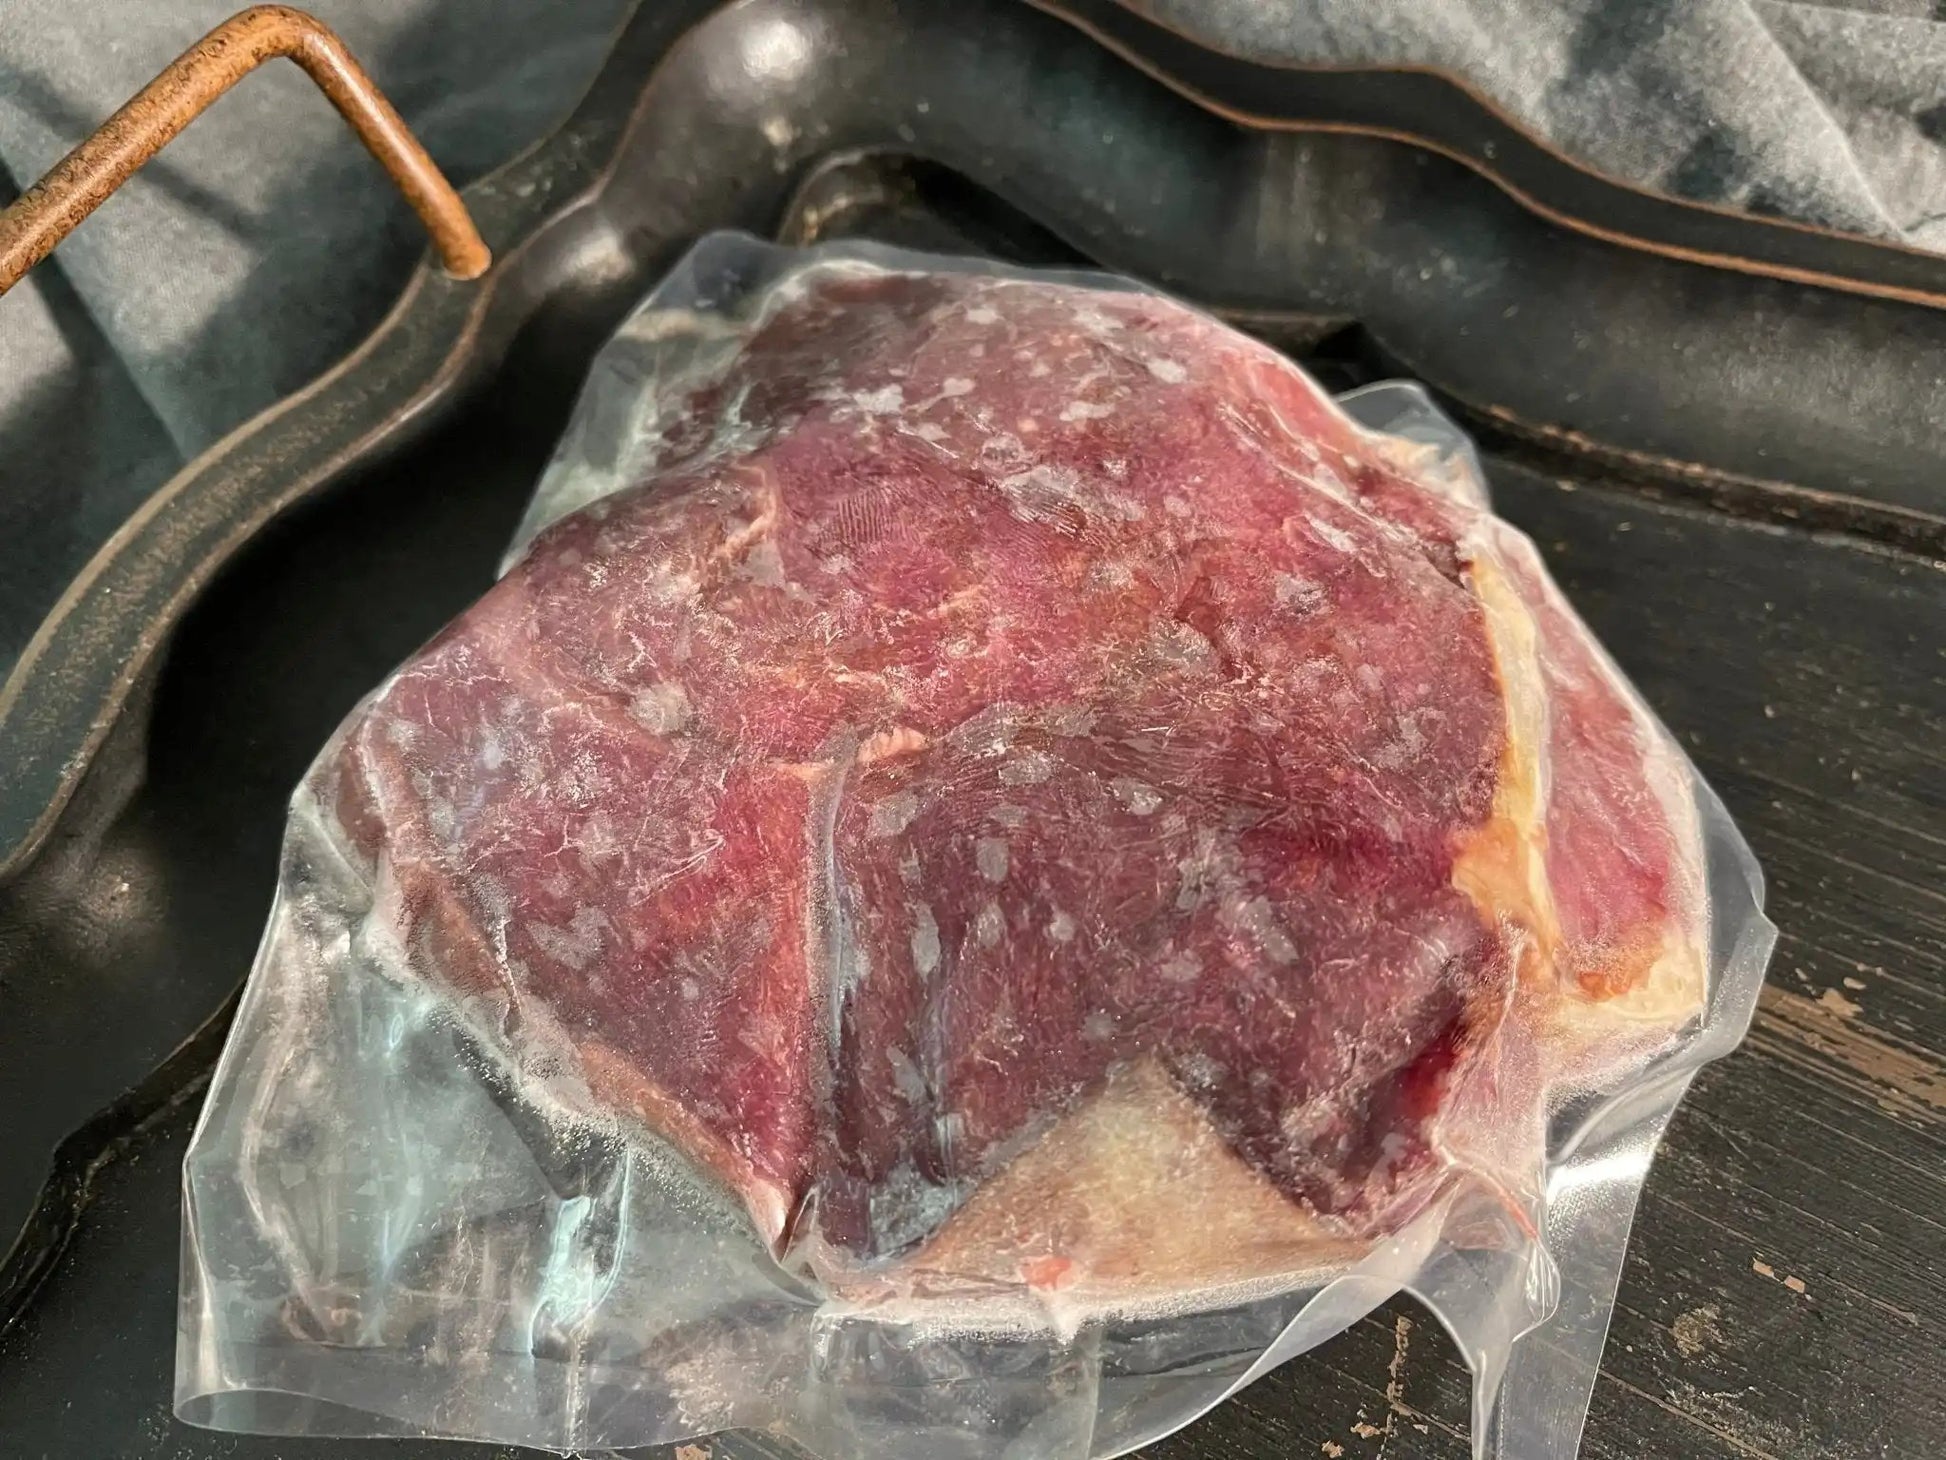 100% All-Natural Grass-Fed "Misfit" Sirloin Steak - The Hufeisen-Ranch (WYO Wagyu)